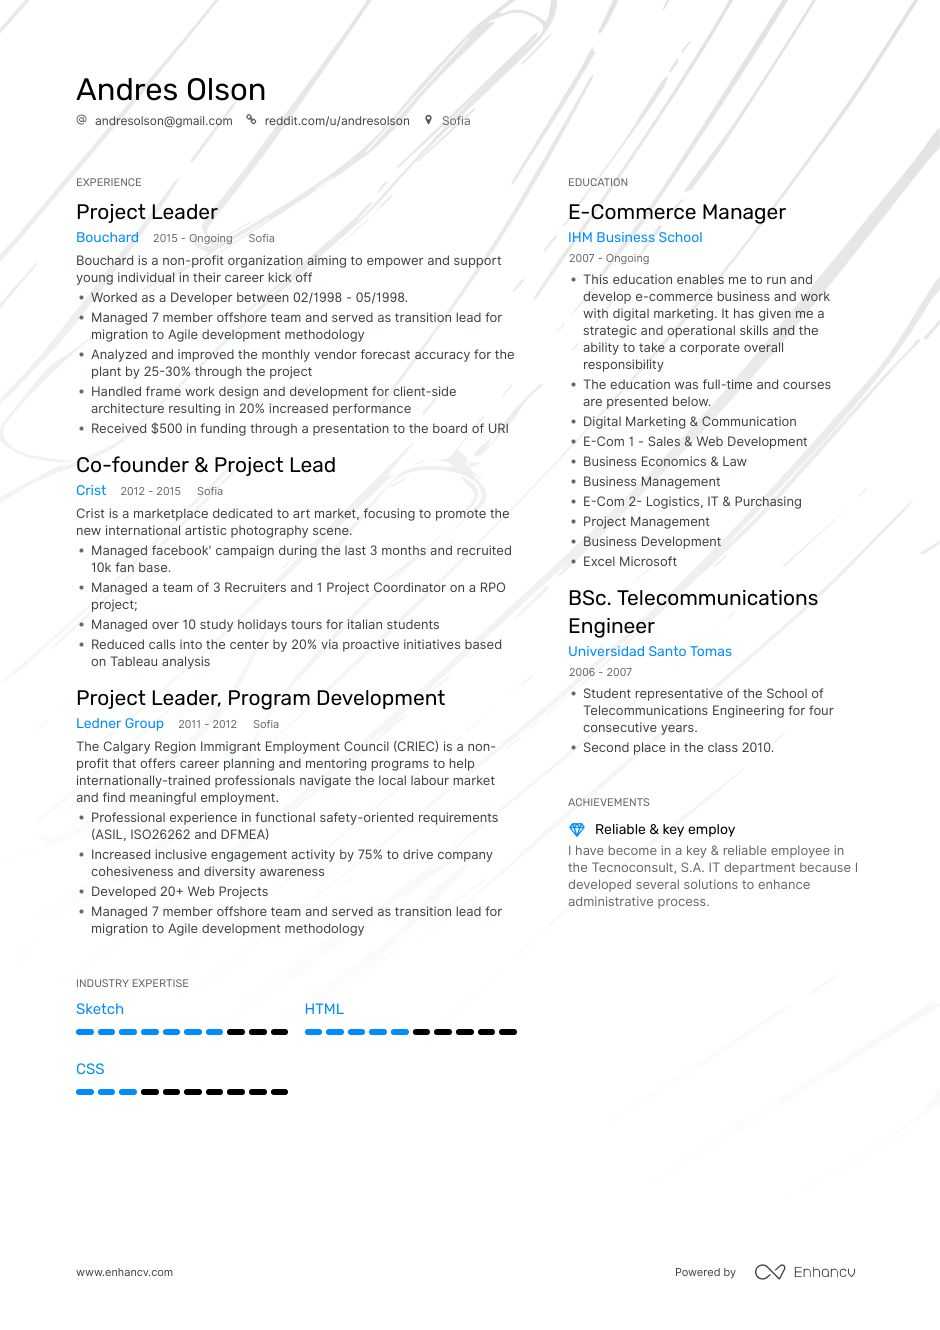 Project Lead Resume Example and guide for 2019